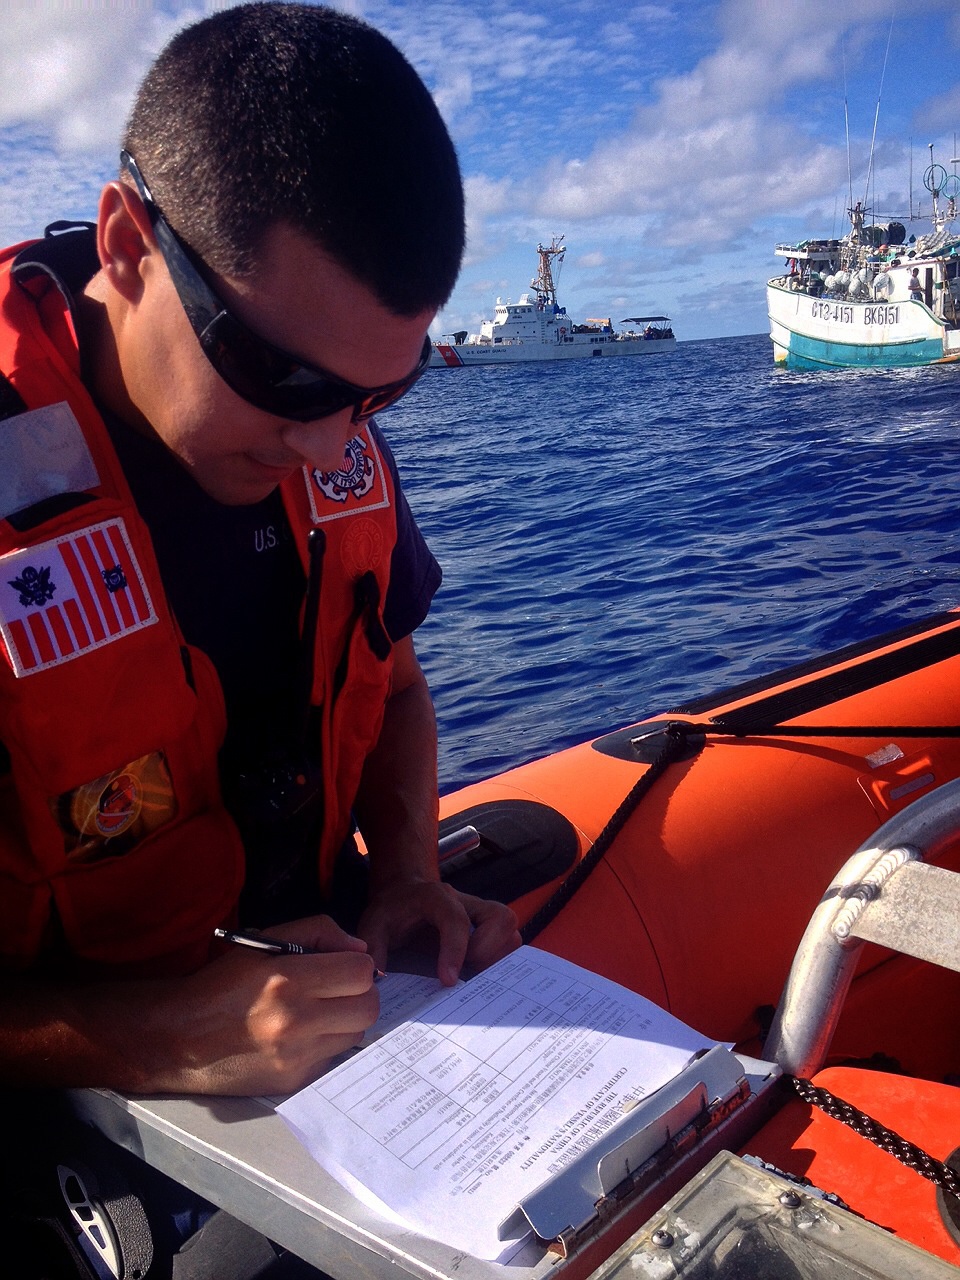 Coast Guard, Republic of Palau participate in search and rescue exercise